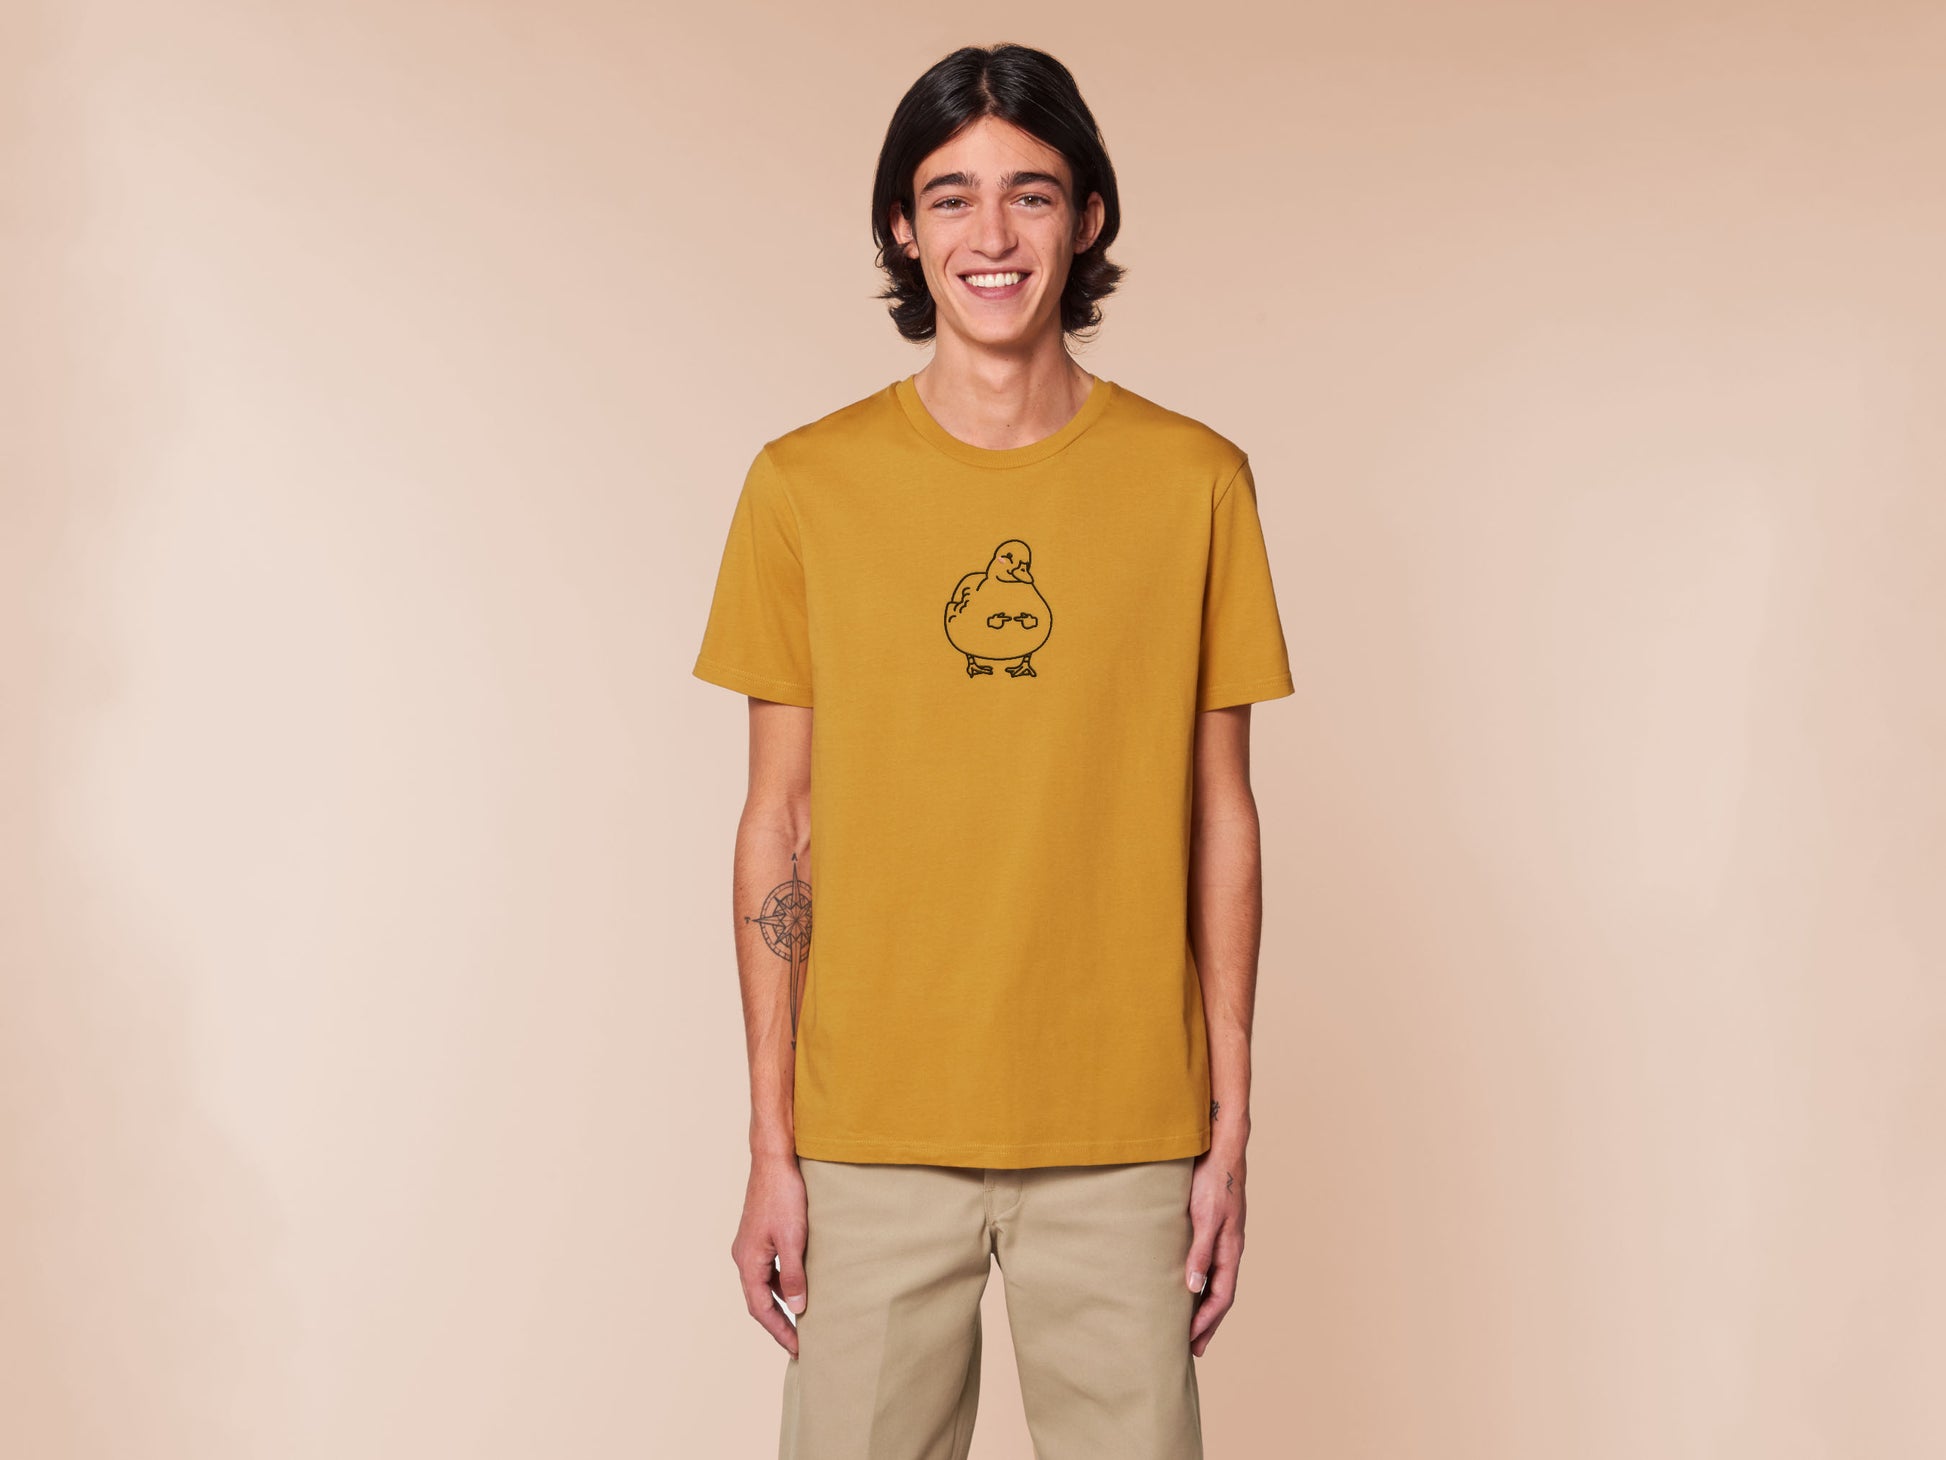 A male wearing a yellow crew neck short sleeve t-shirt, with an embroidered black thread design of cute blushing duck with the for me finger hand emoji symbols